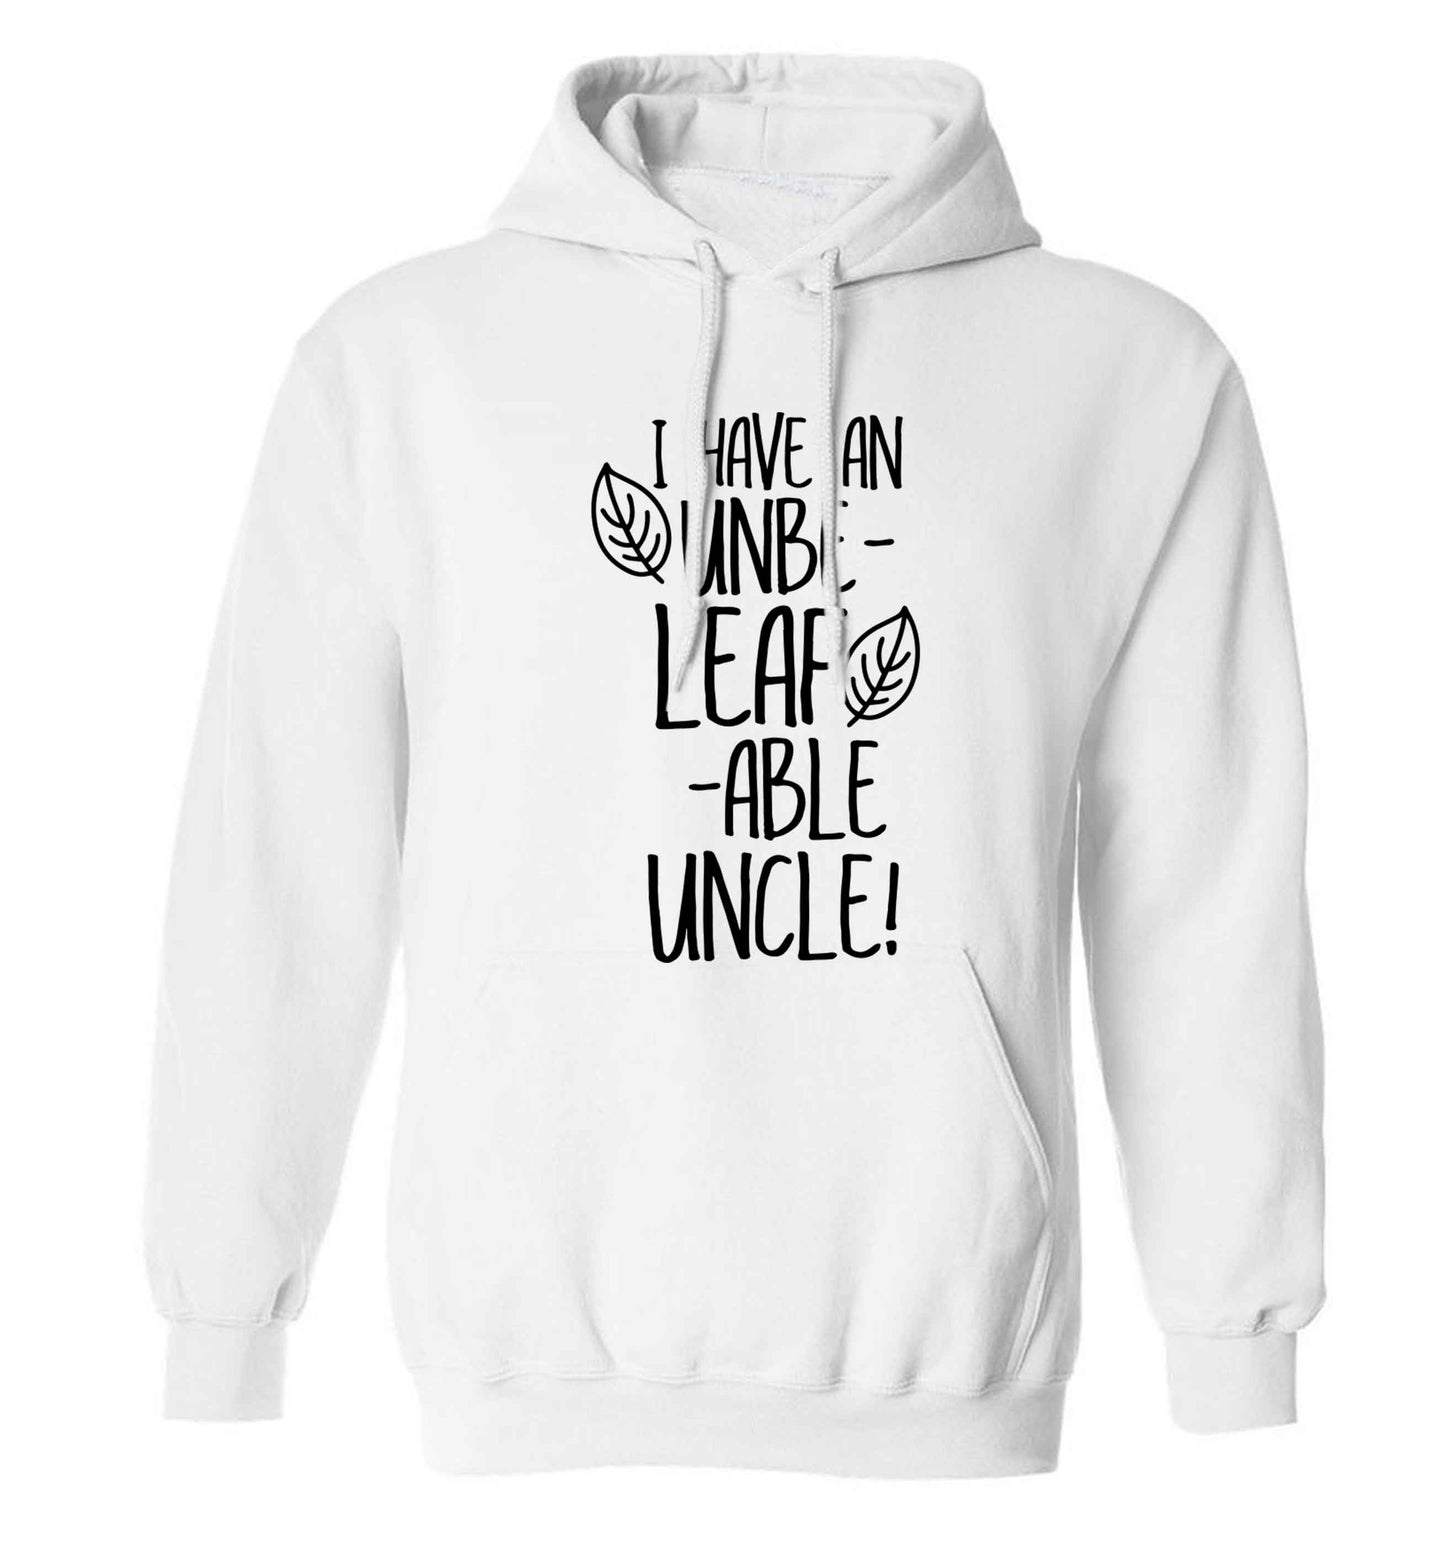 I have an unbe-leaf-able uncle adults unisex white hoodie 2XL